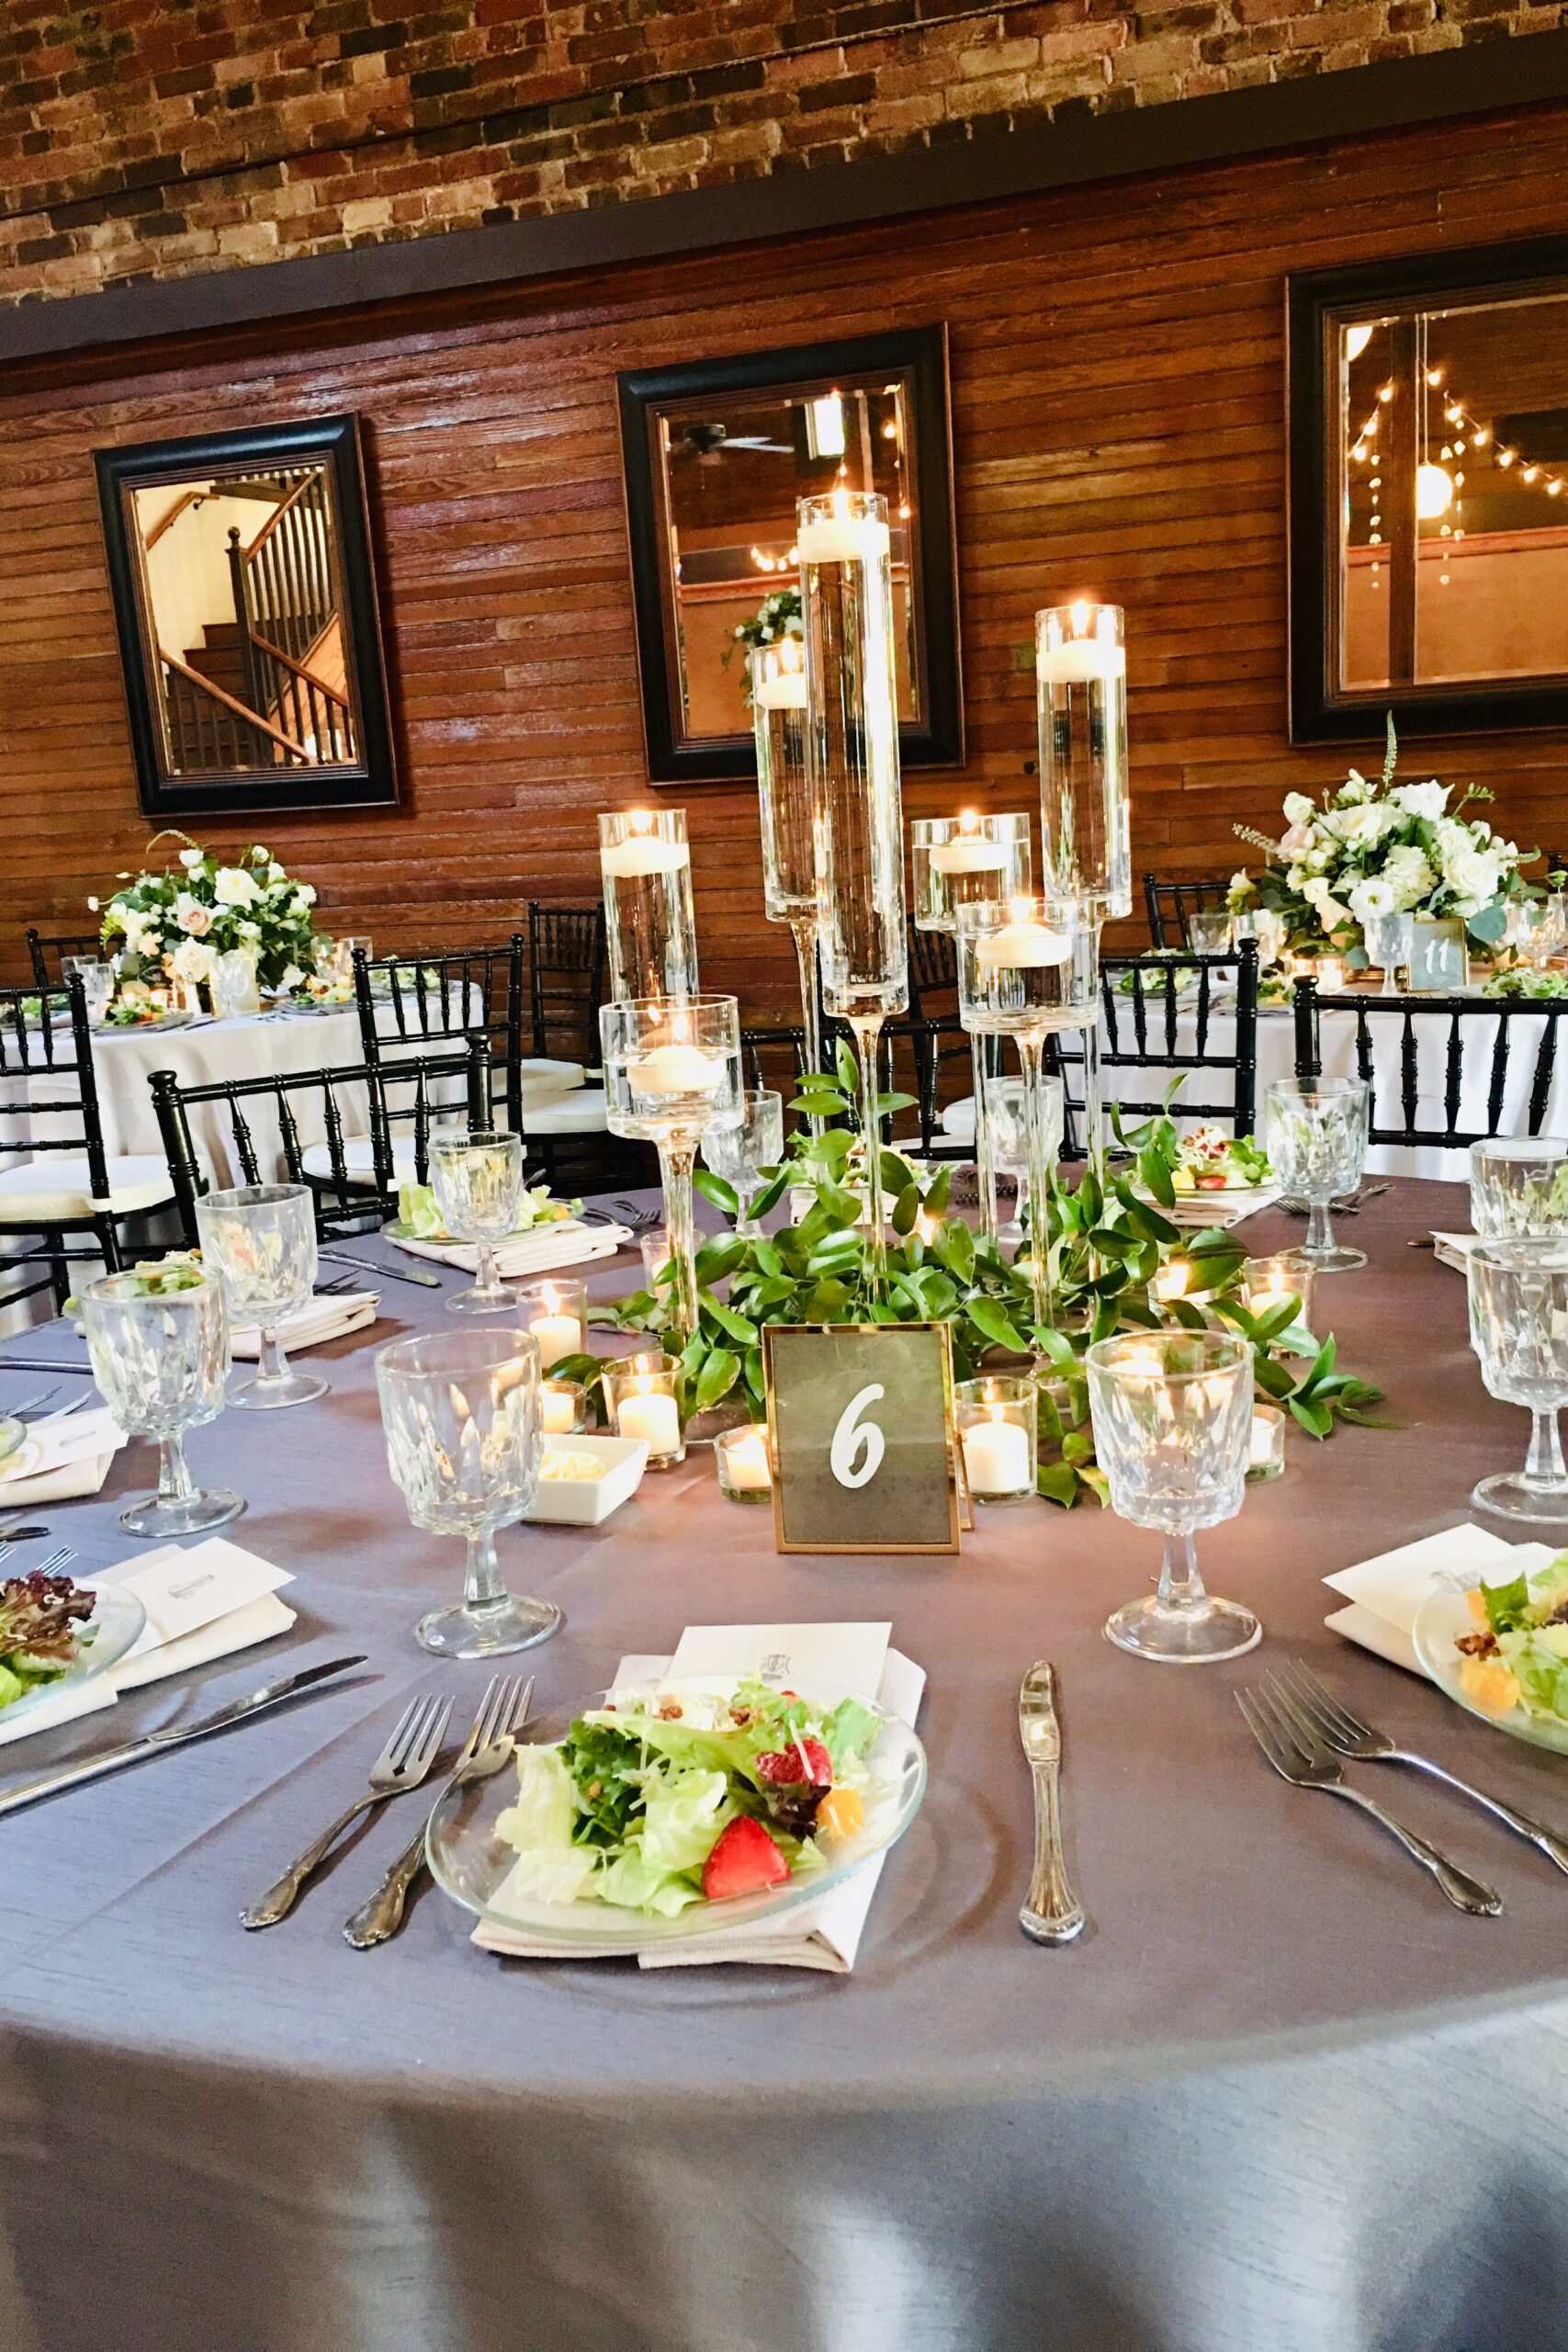 Start Gathering Wedding Ideas is a Beautiful table setting with gray velvet table linen, mix heighted hand blown stemmed candle holders with floating candles decorated with greenery with crystal glassware is just gorgeous 